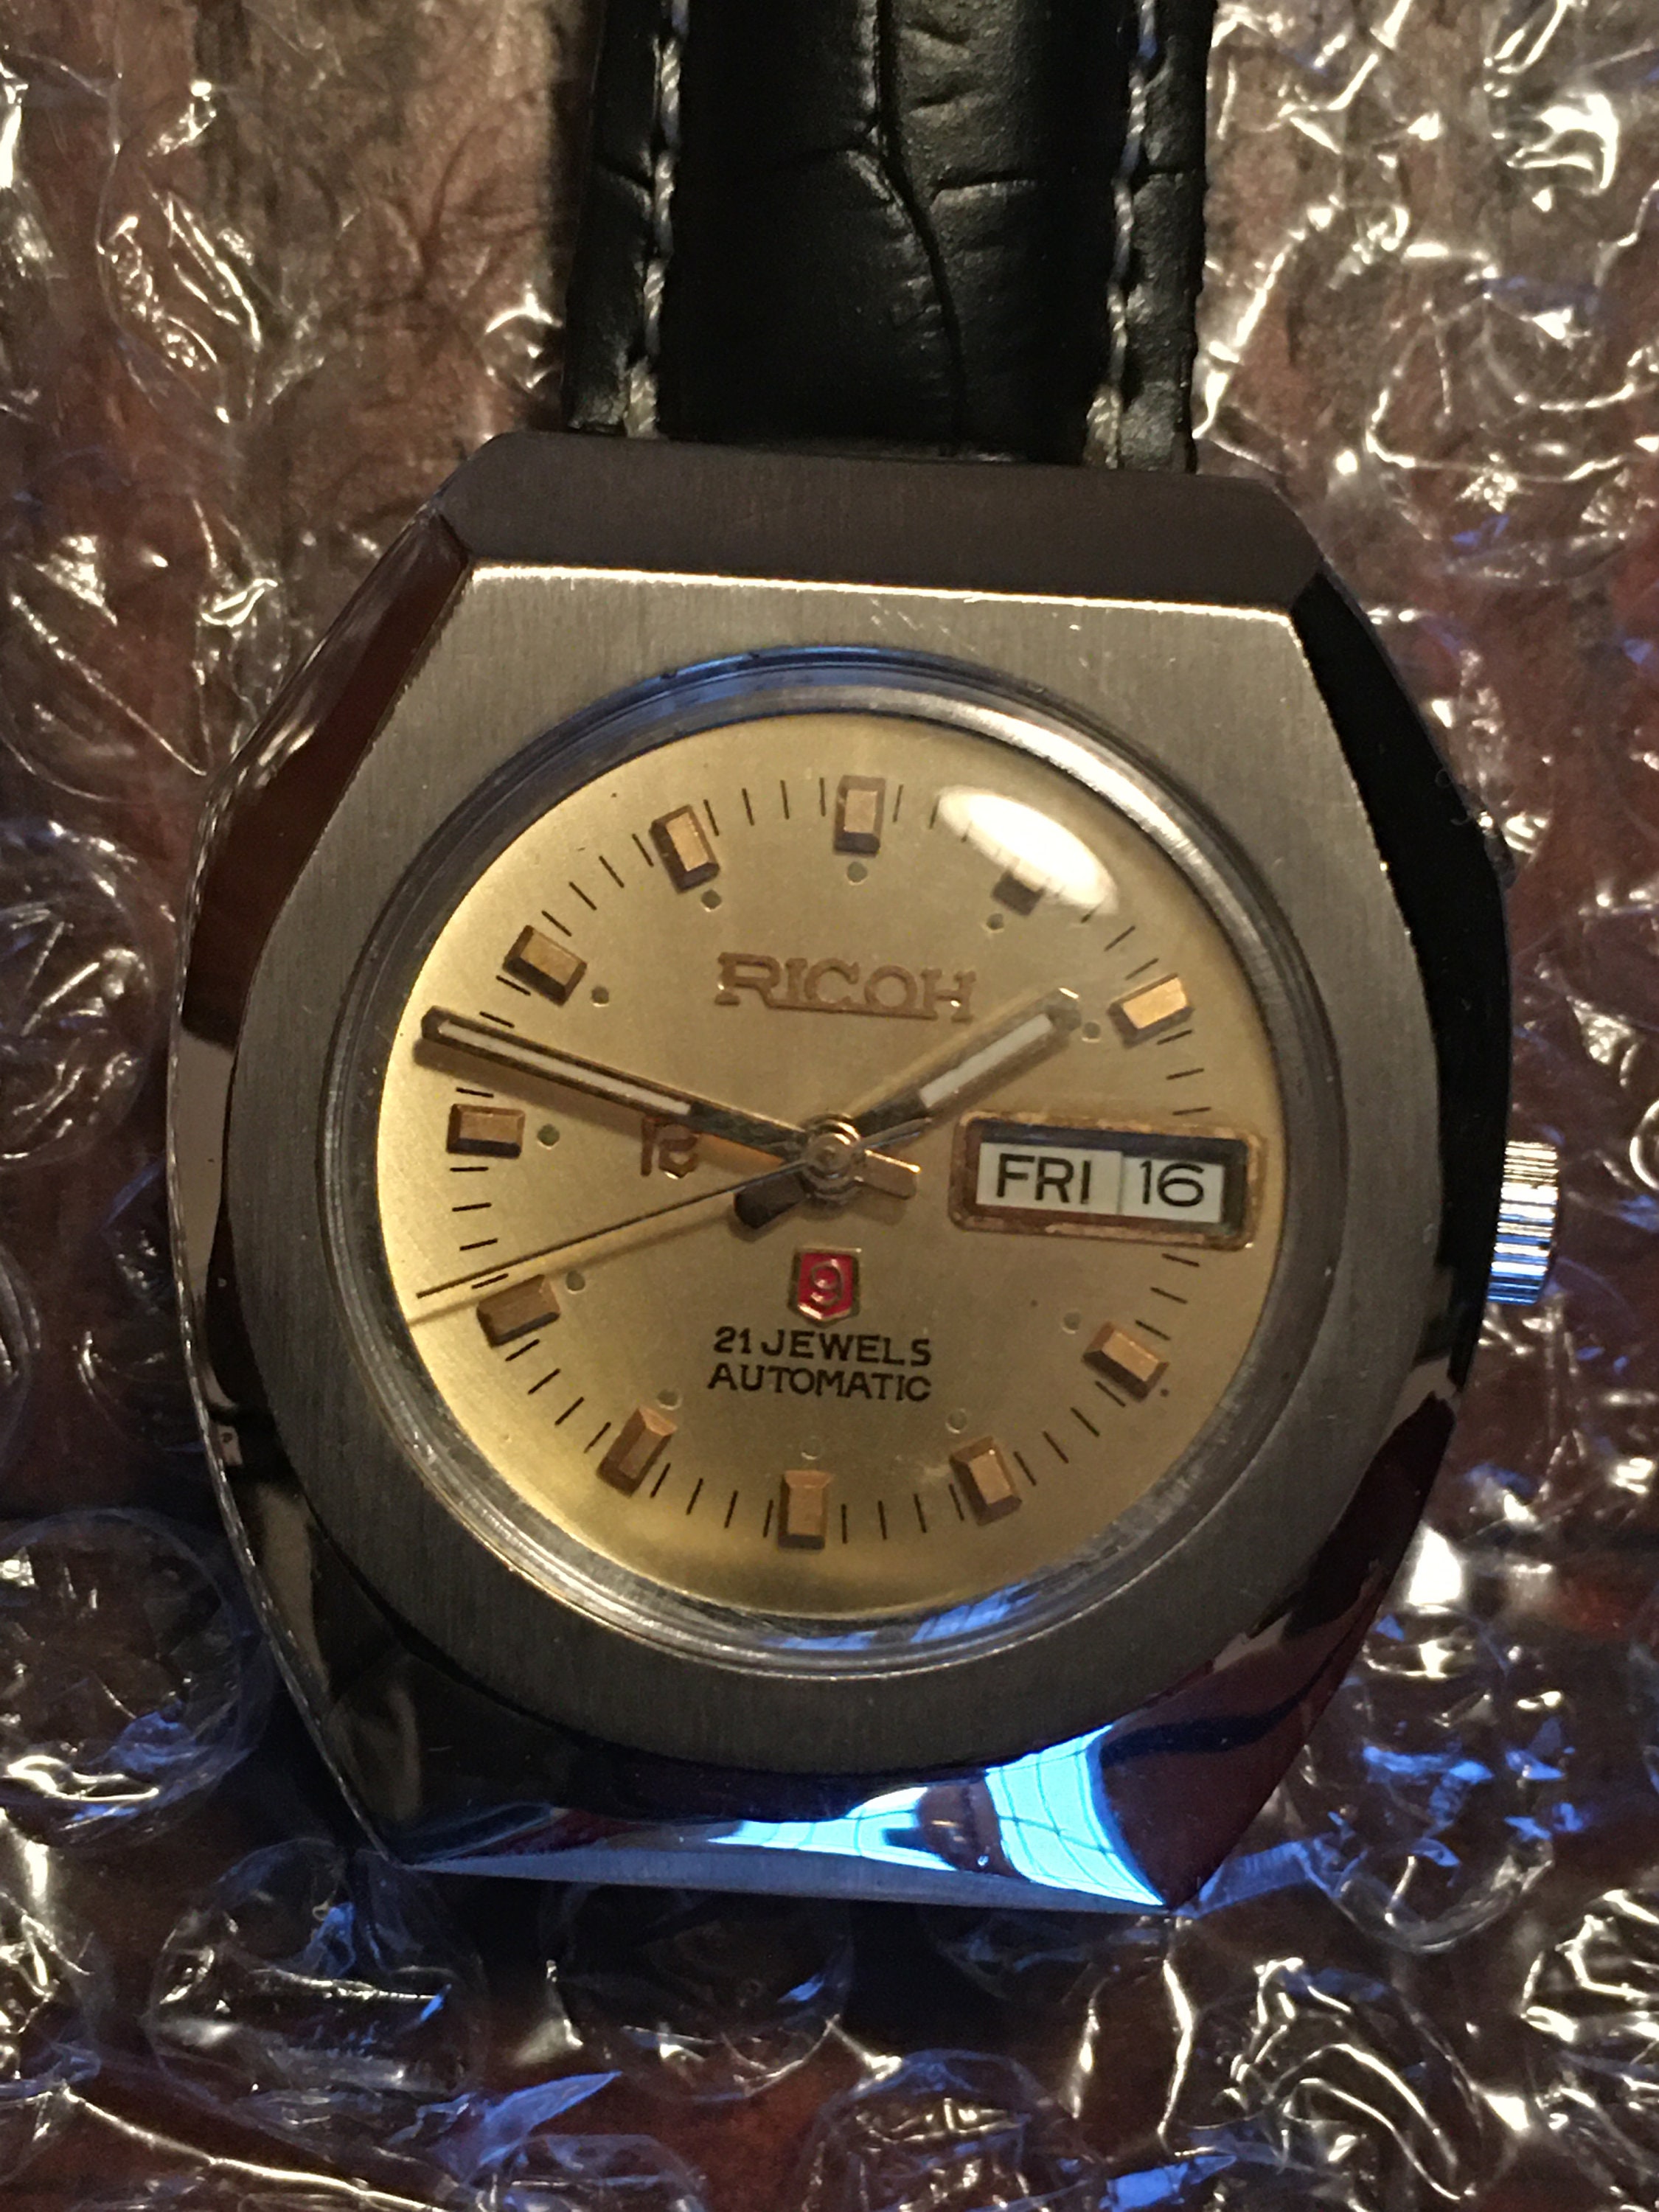 RICOH Genuine Japanese Watch Rare Automatic Perfectly Working - Etsy